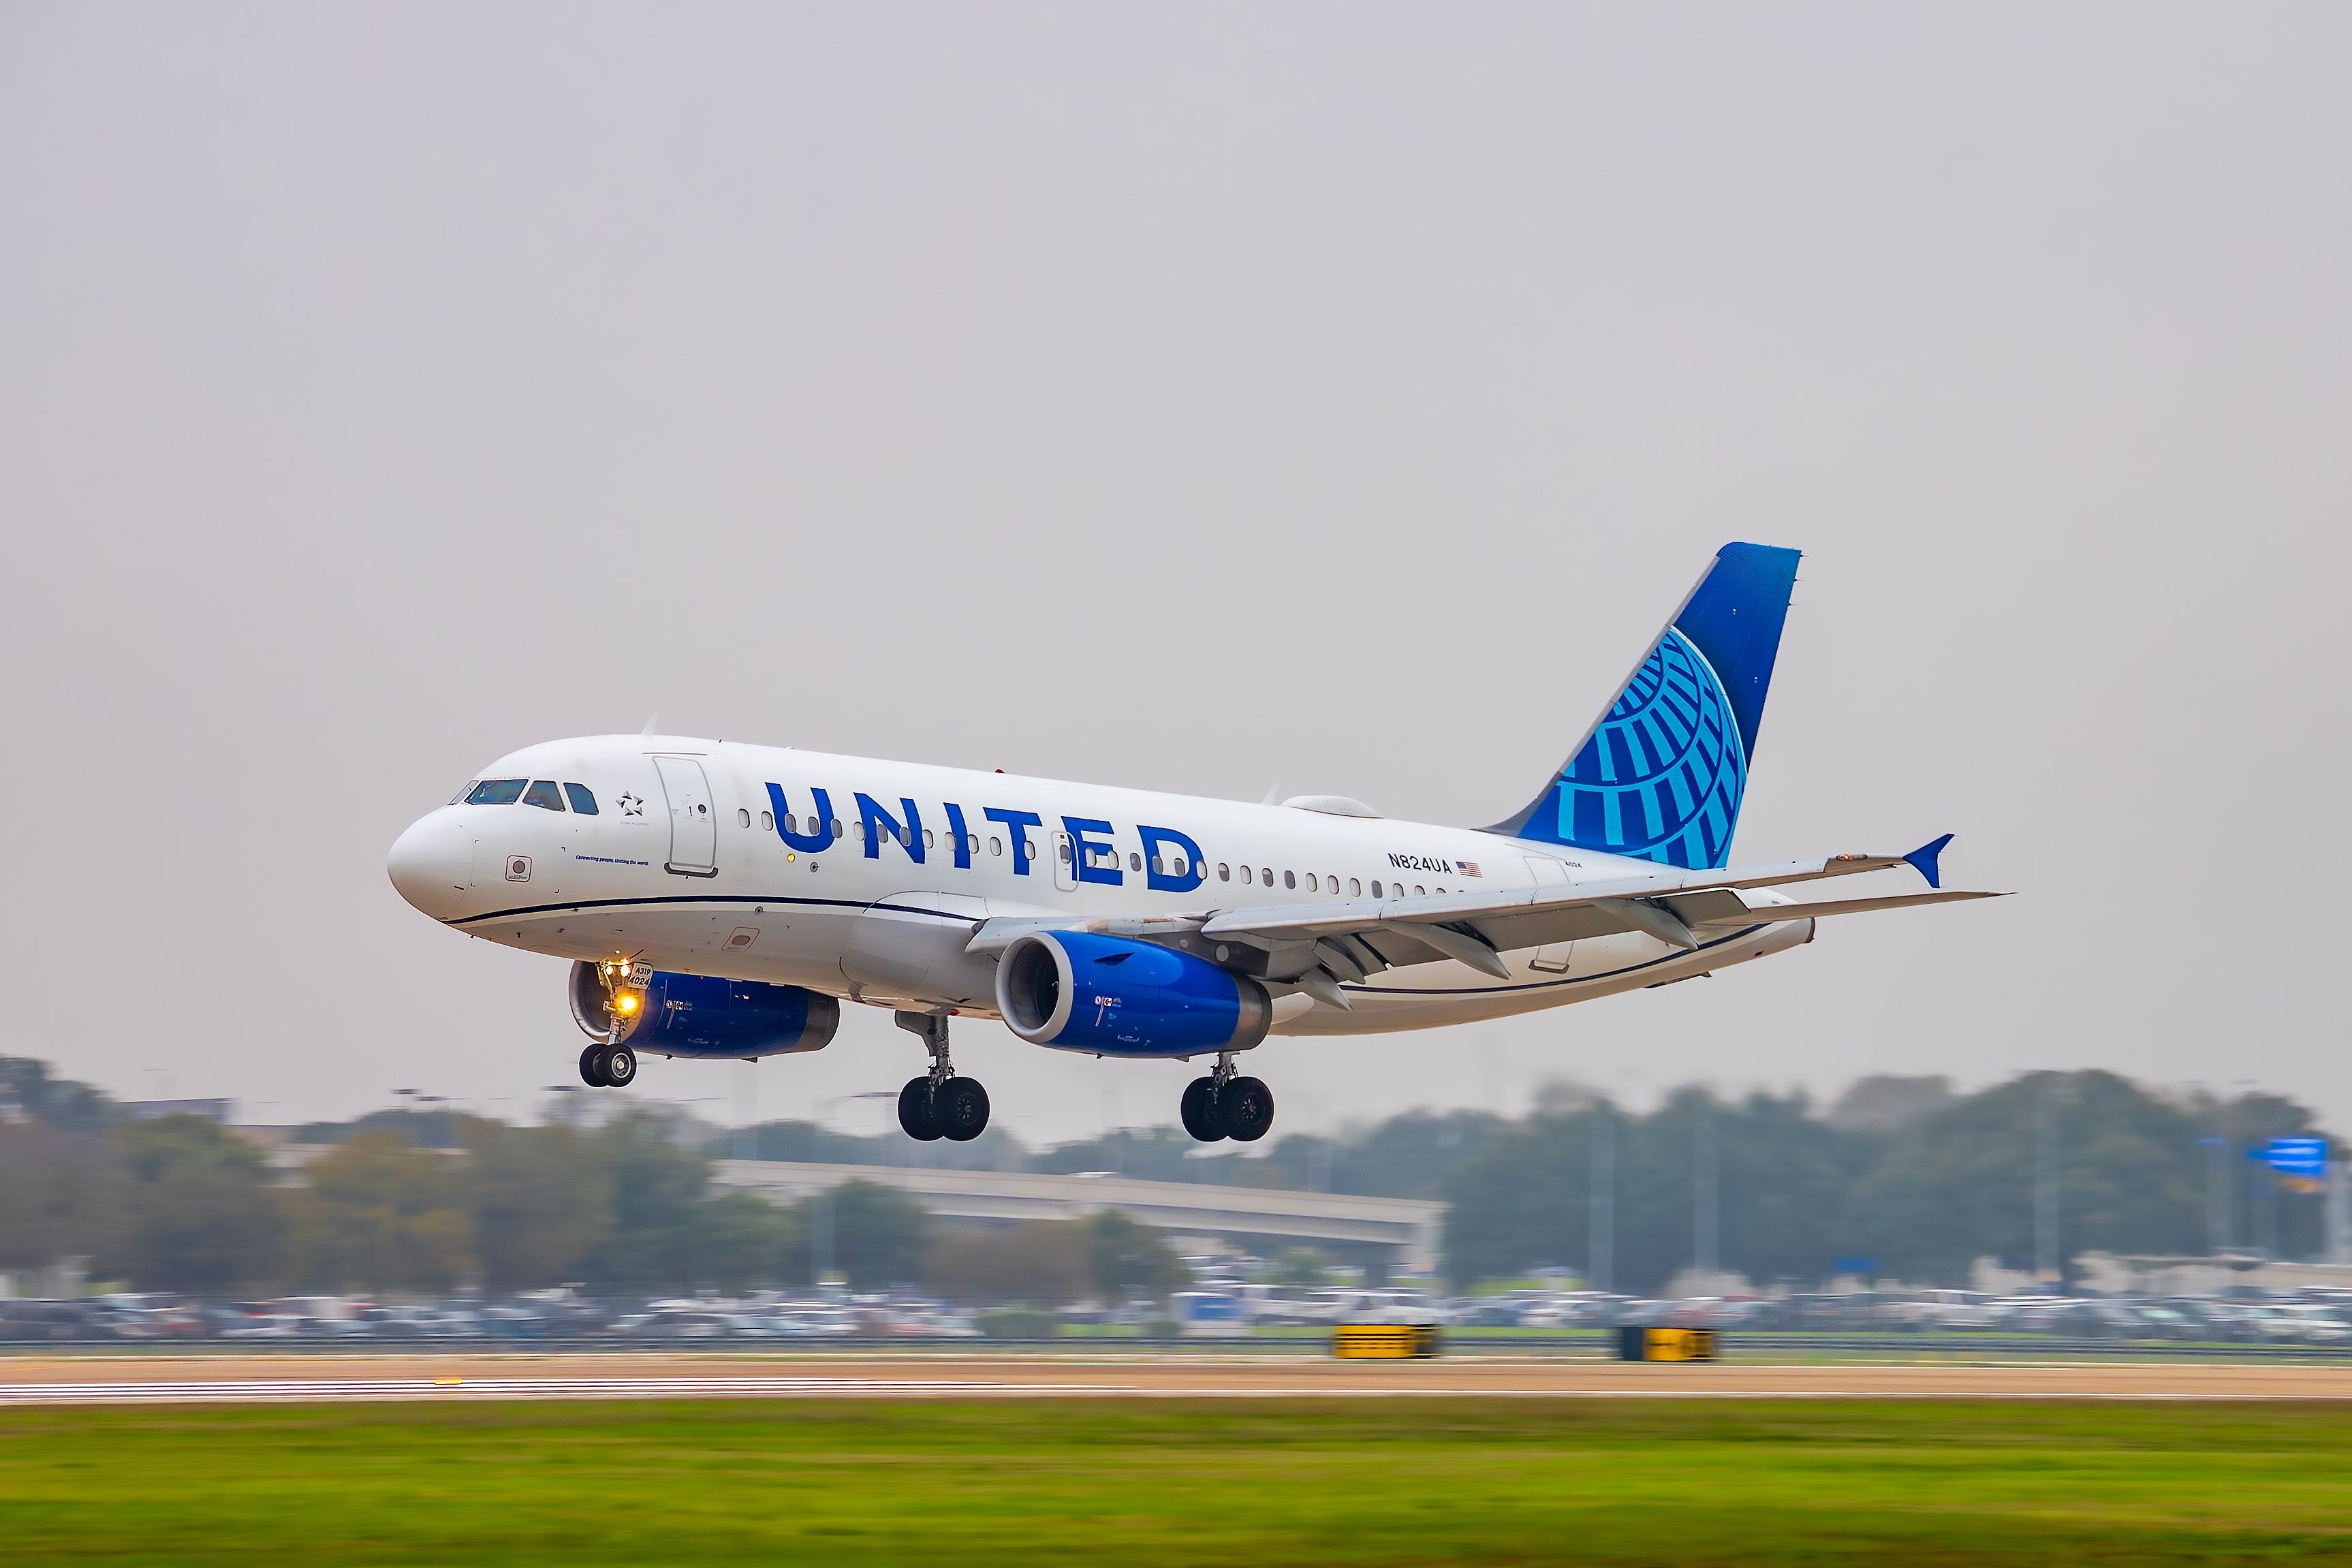 A United Airlines Airbus A319 about to land.